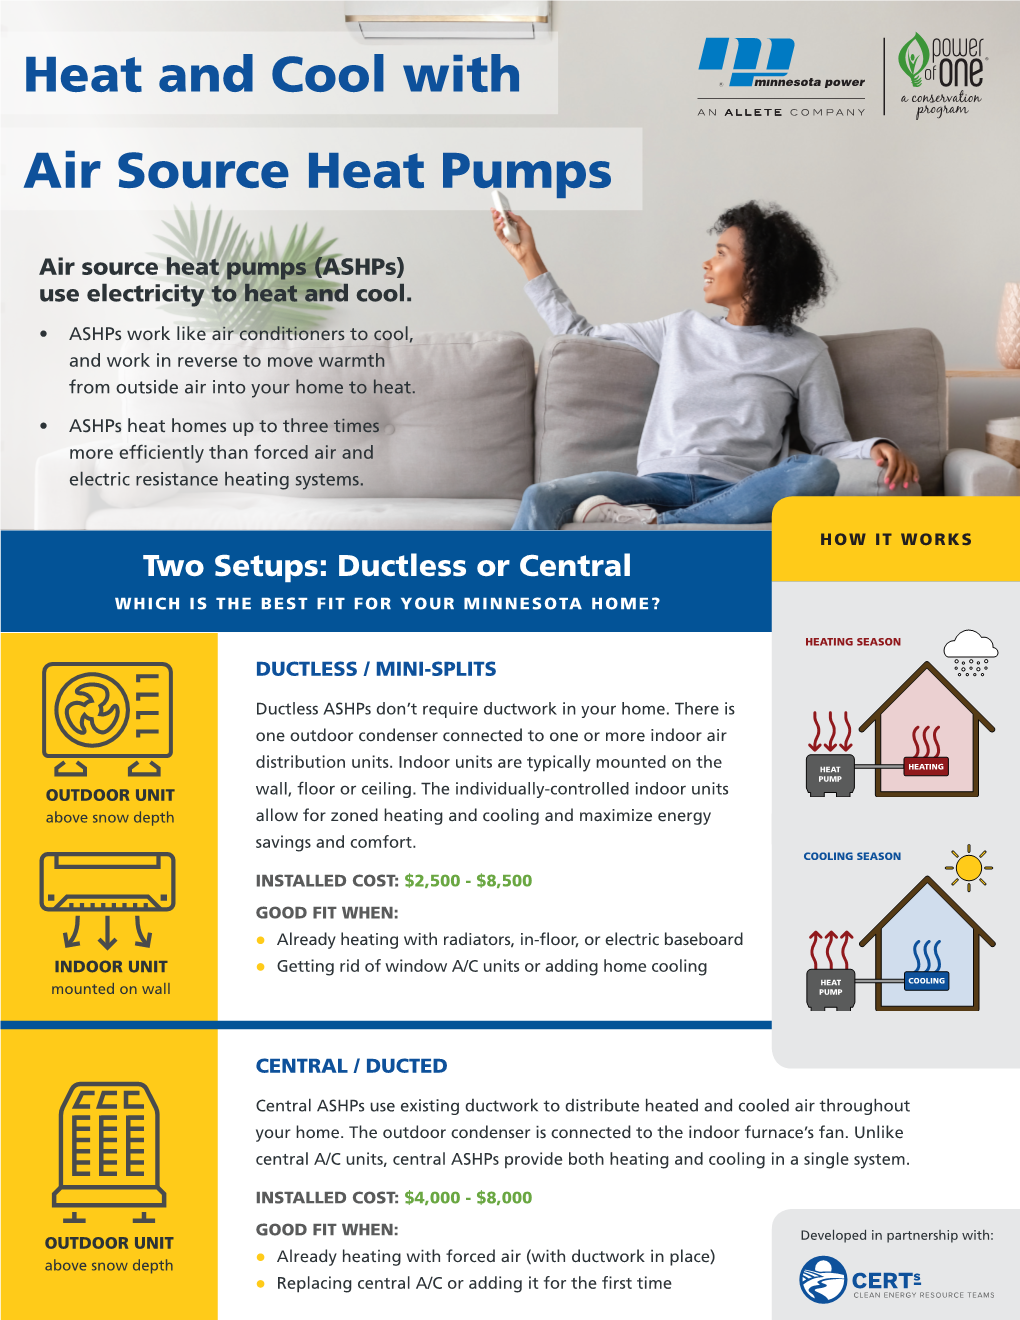 Heat and Cool with Air Source Heat Pumps